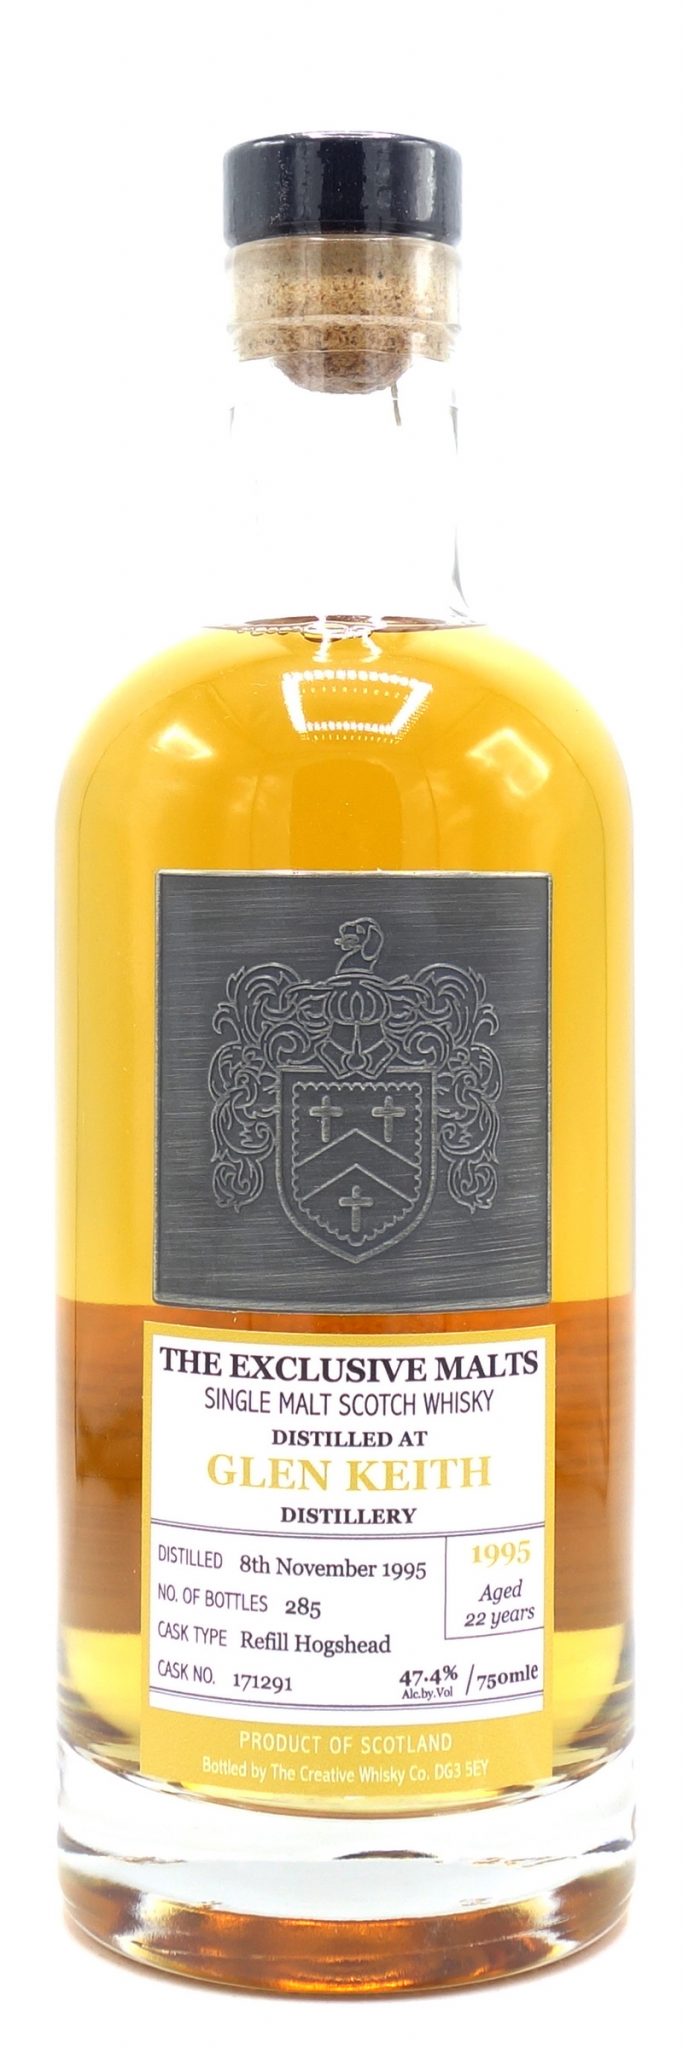 1995 Exclusive Malts Scotch Whisky Glen Keith, 22 Year Old 750ml